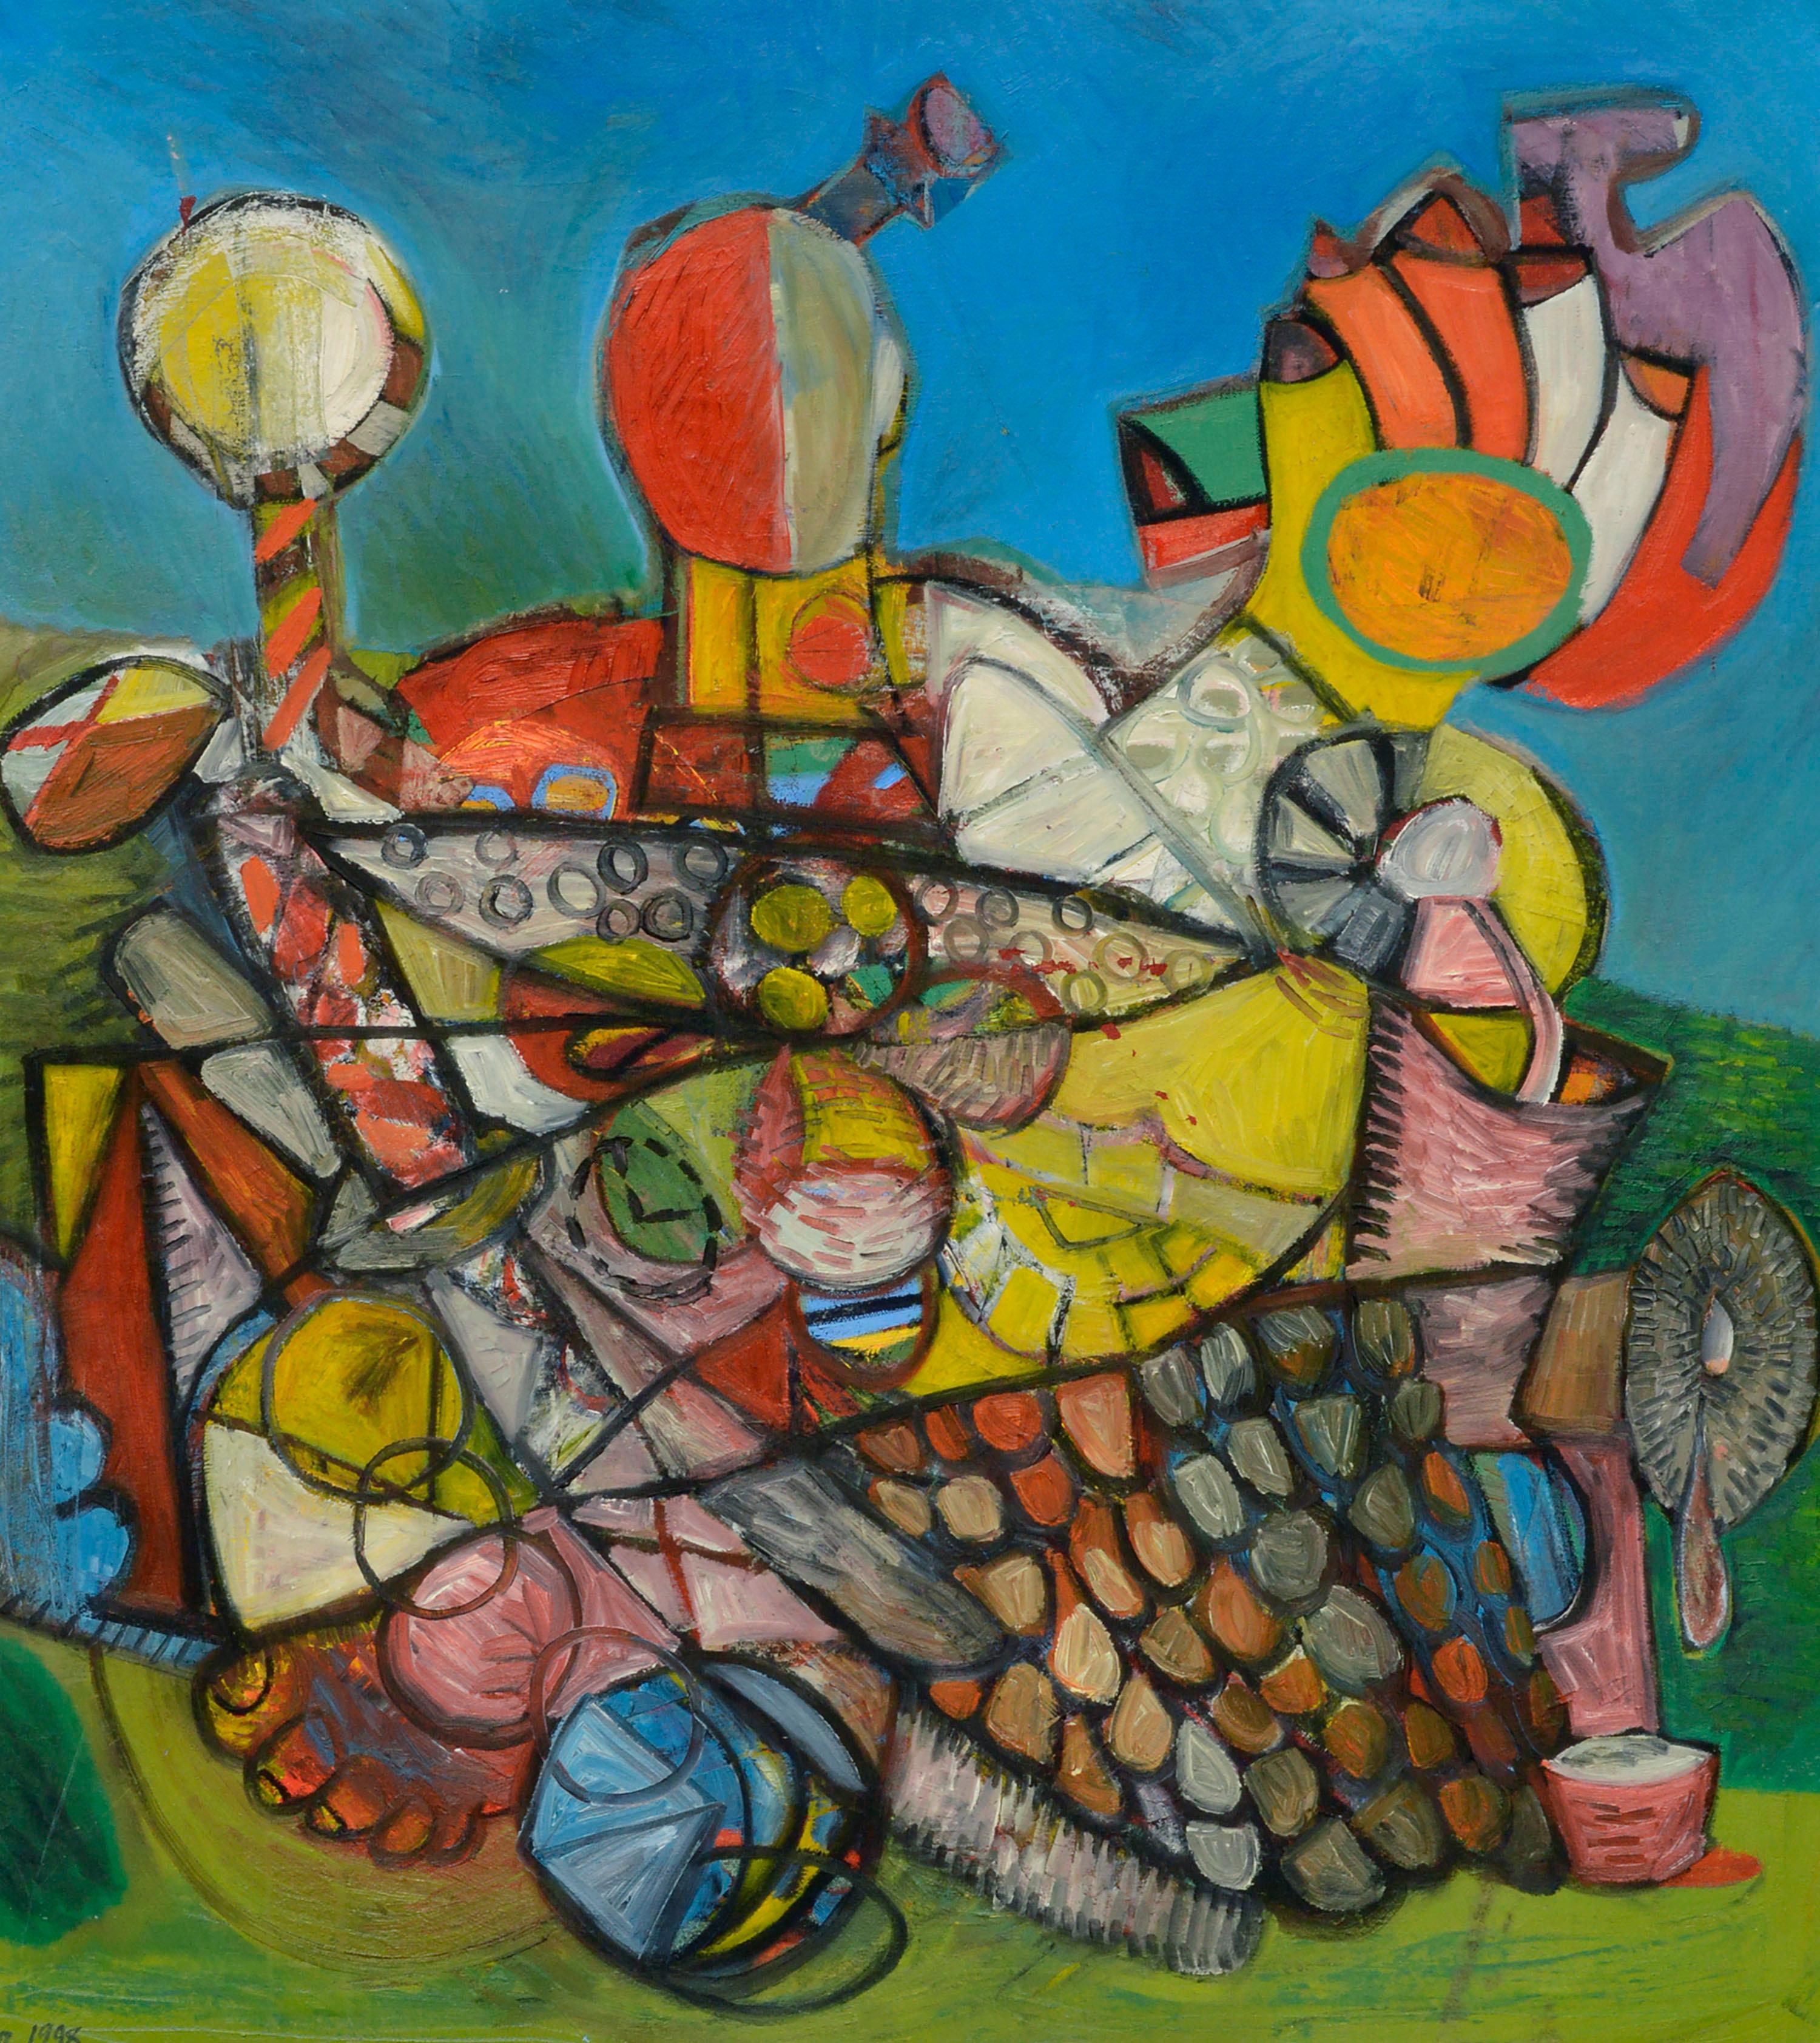 Colorful Samurai, Large-Scale Modern Figural Geometric Abstract  - Painting by Susan Baker